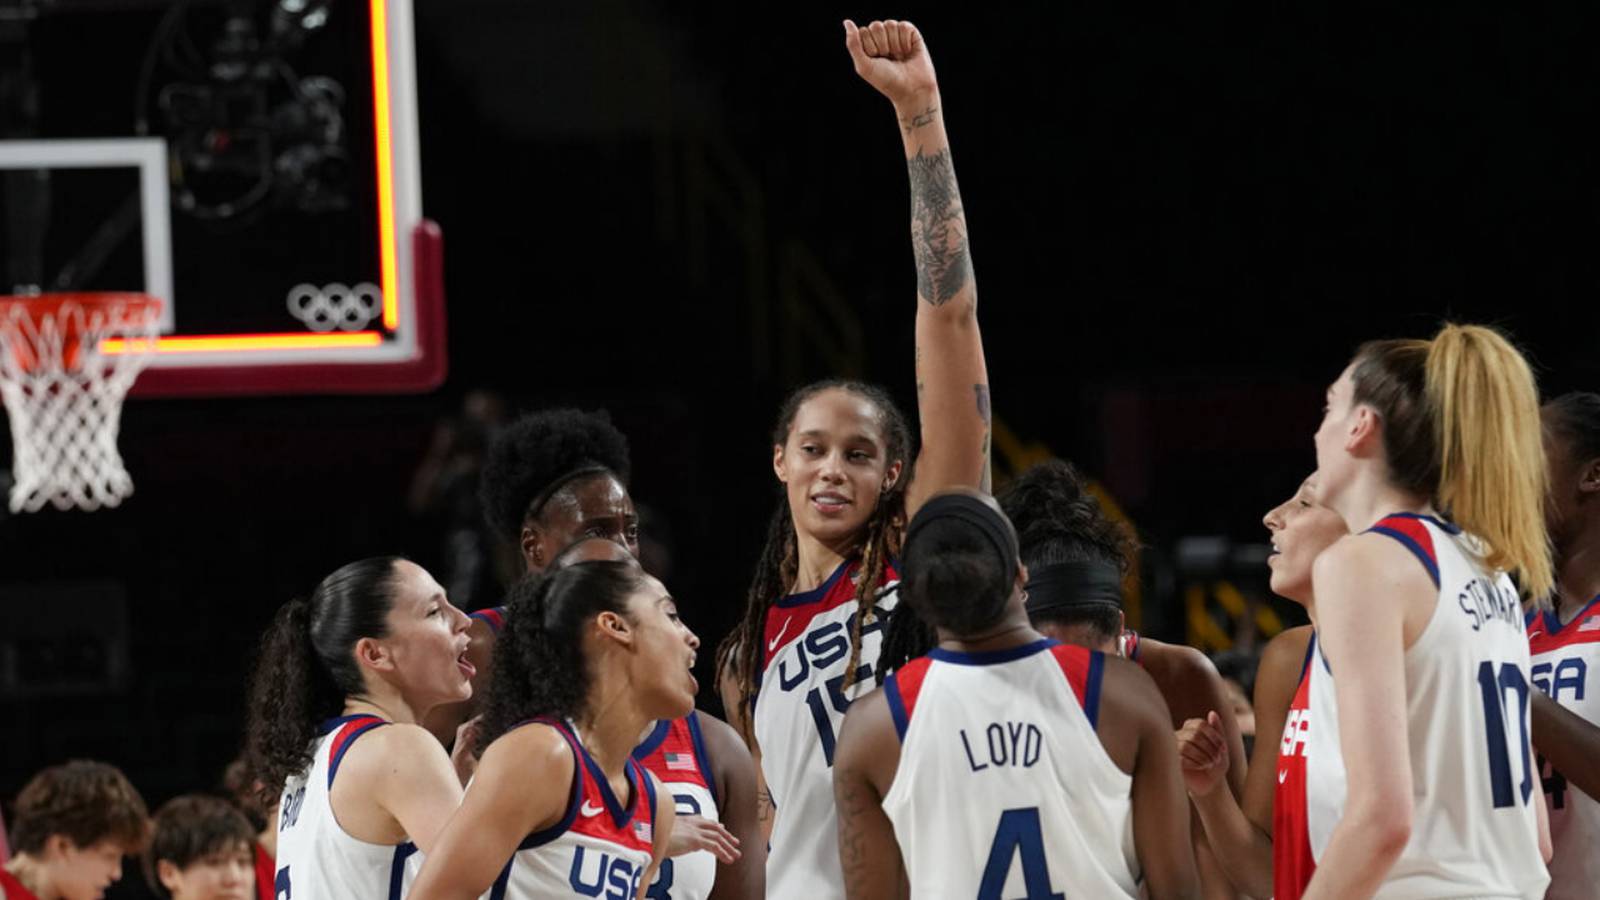 Tokyo Olympics US women’s basketball team wins 7th straight gold medal